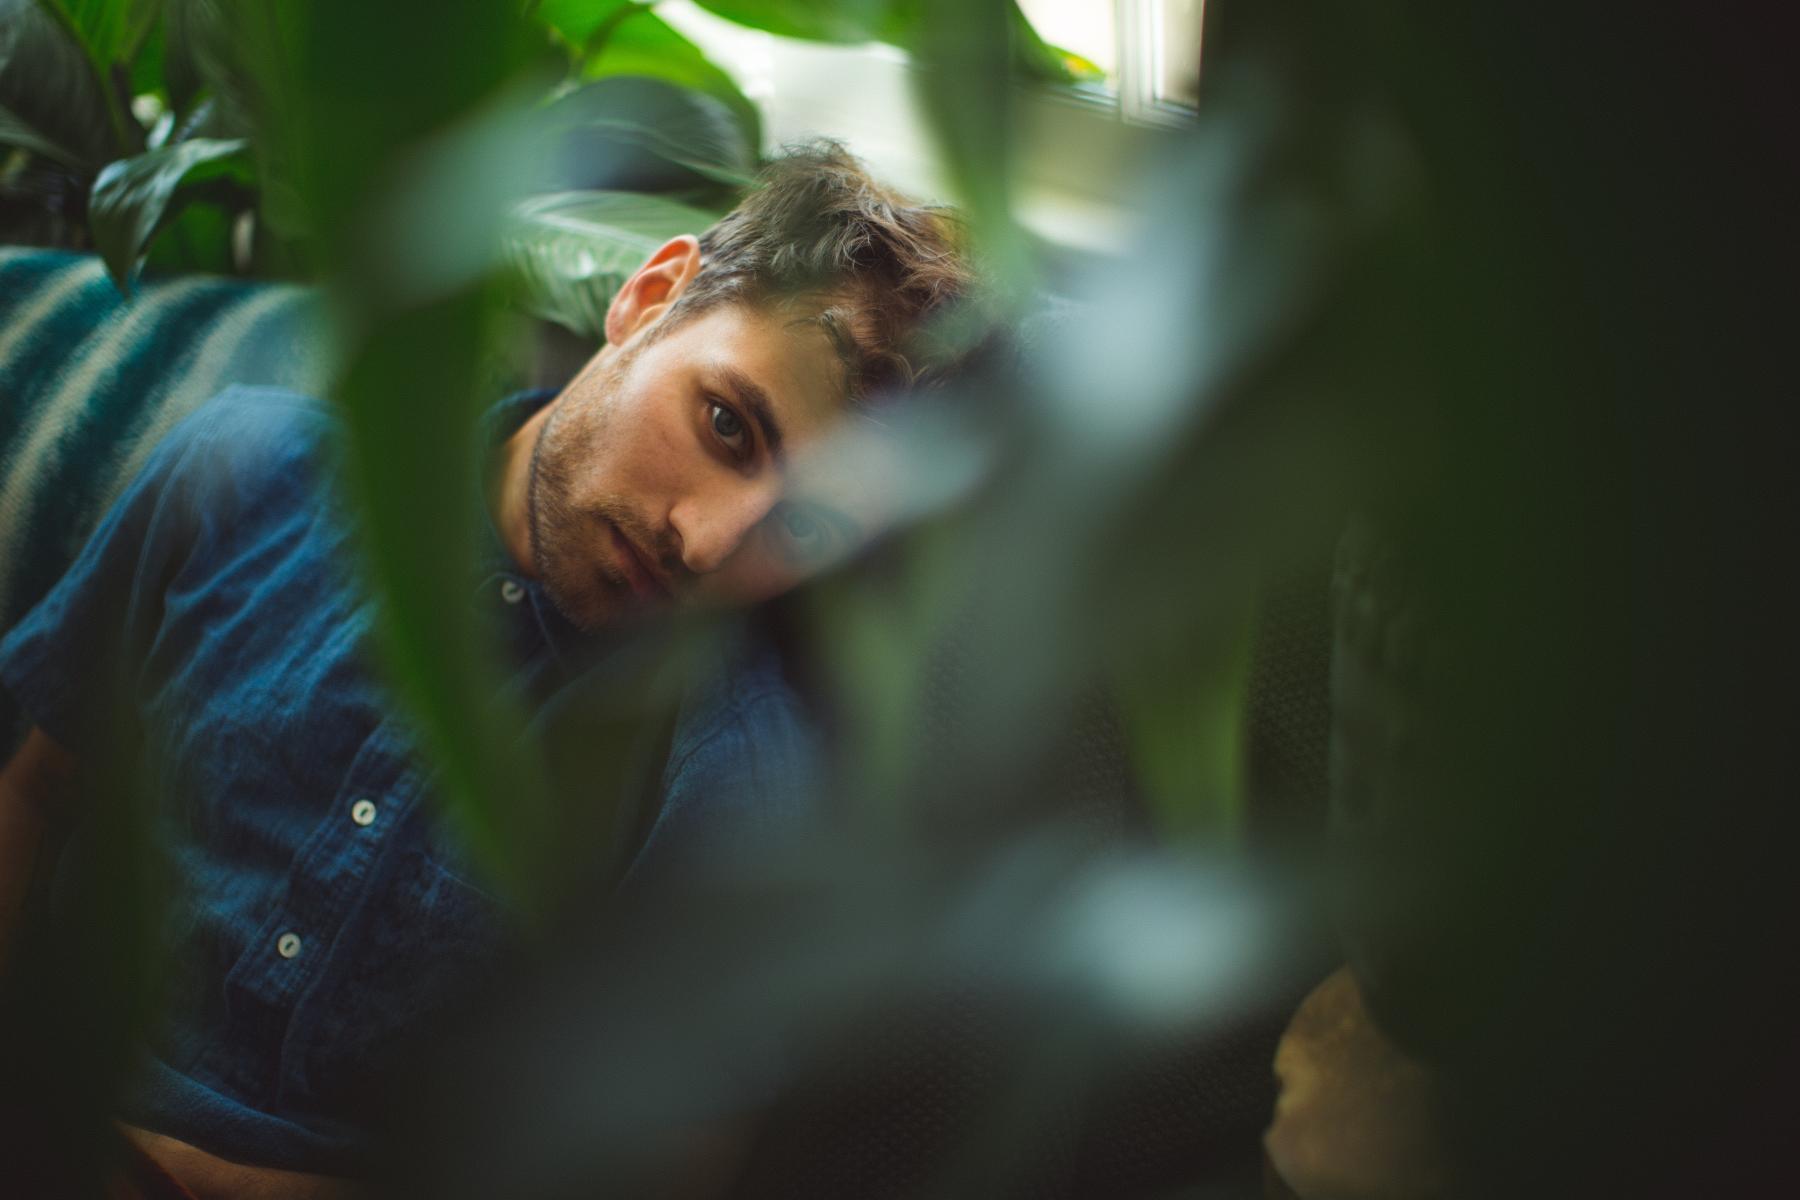 Yoke Lore with special guest girlhouse